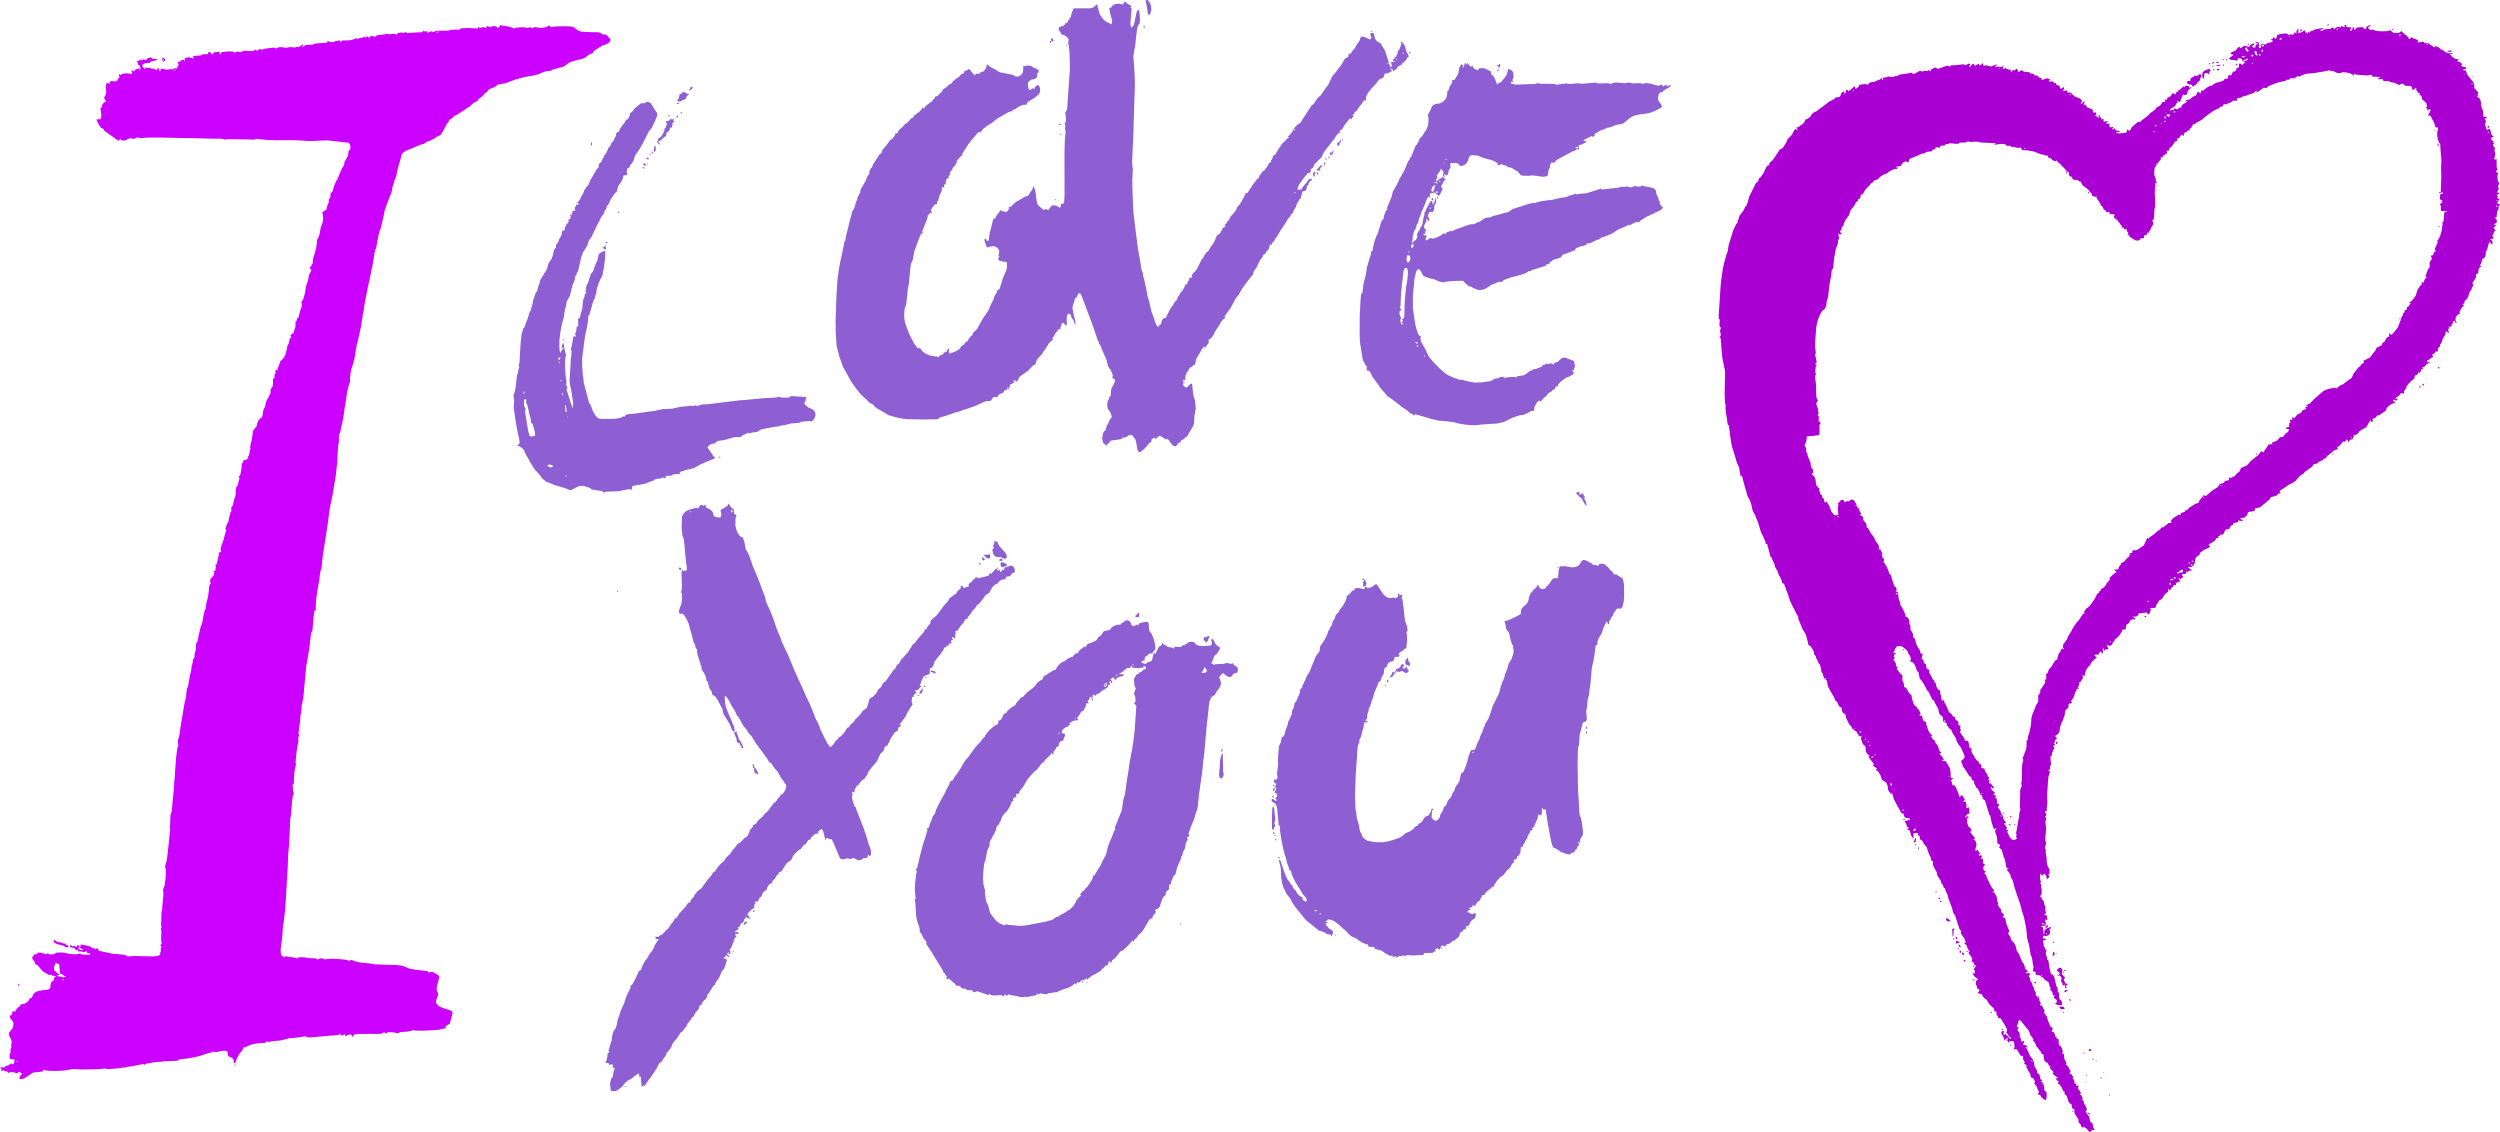 I Love You Text PNG HD and HQ Image pngteam.com